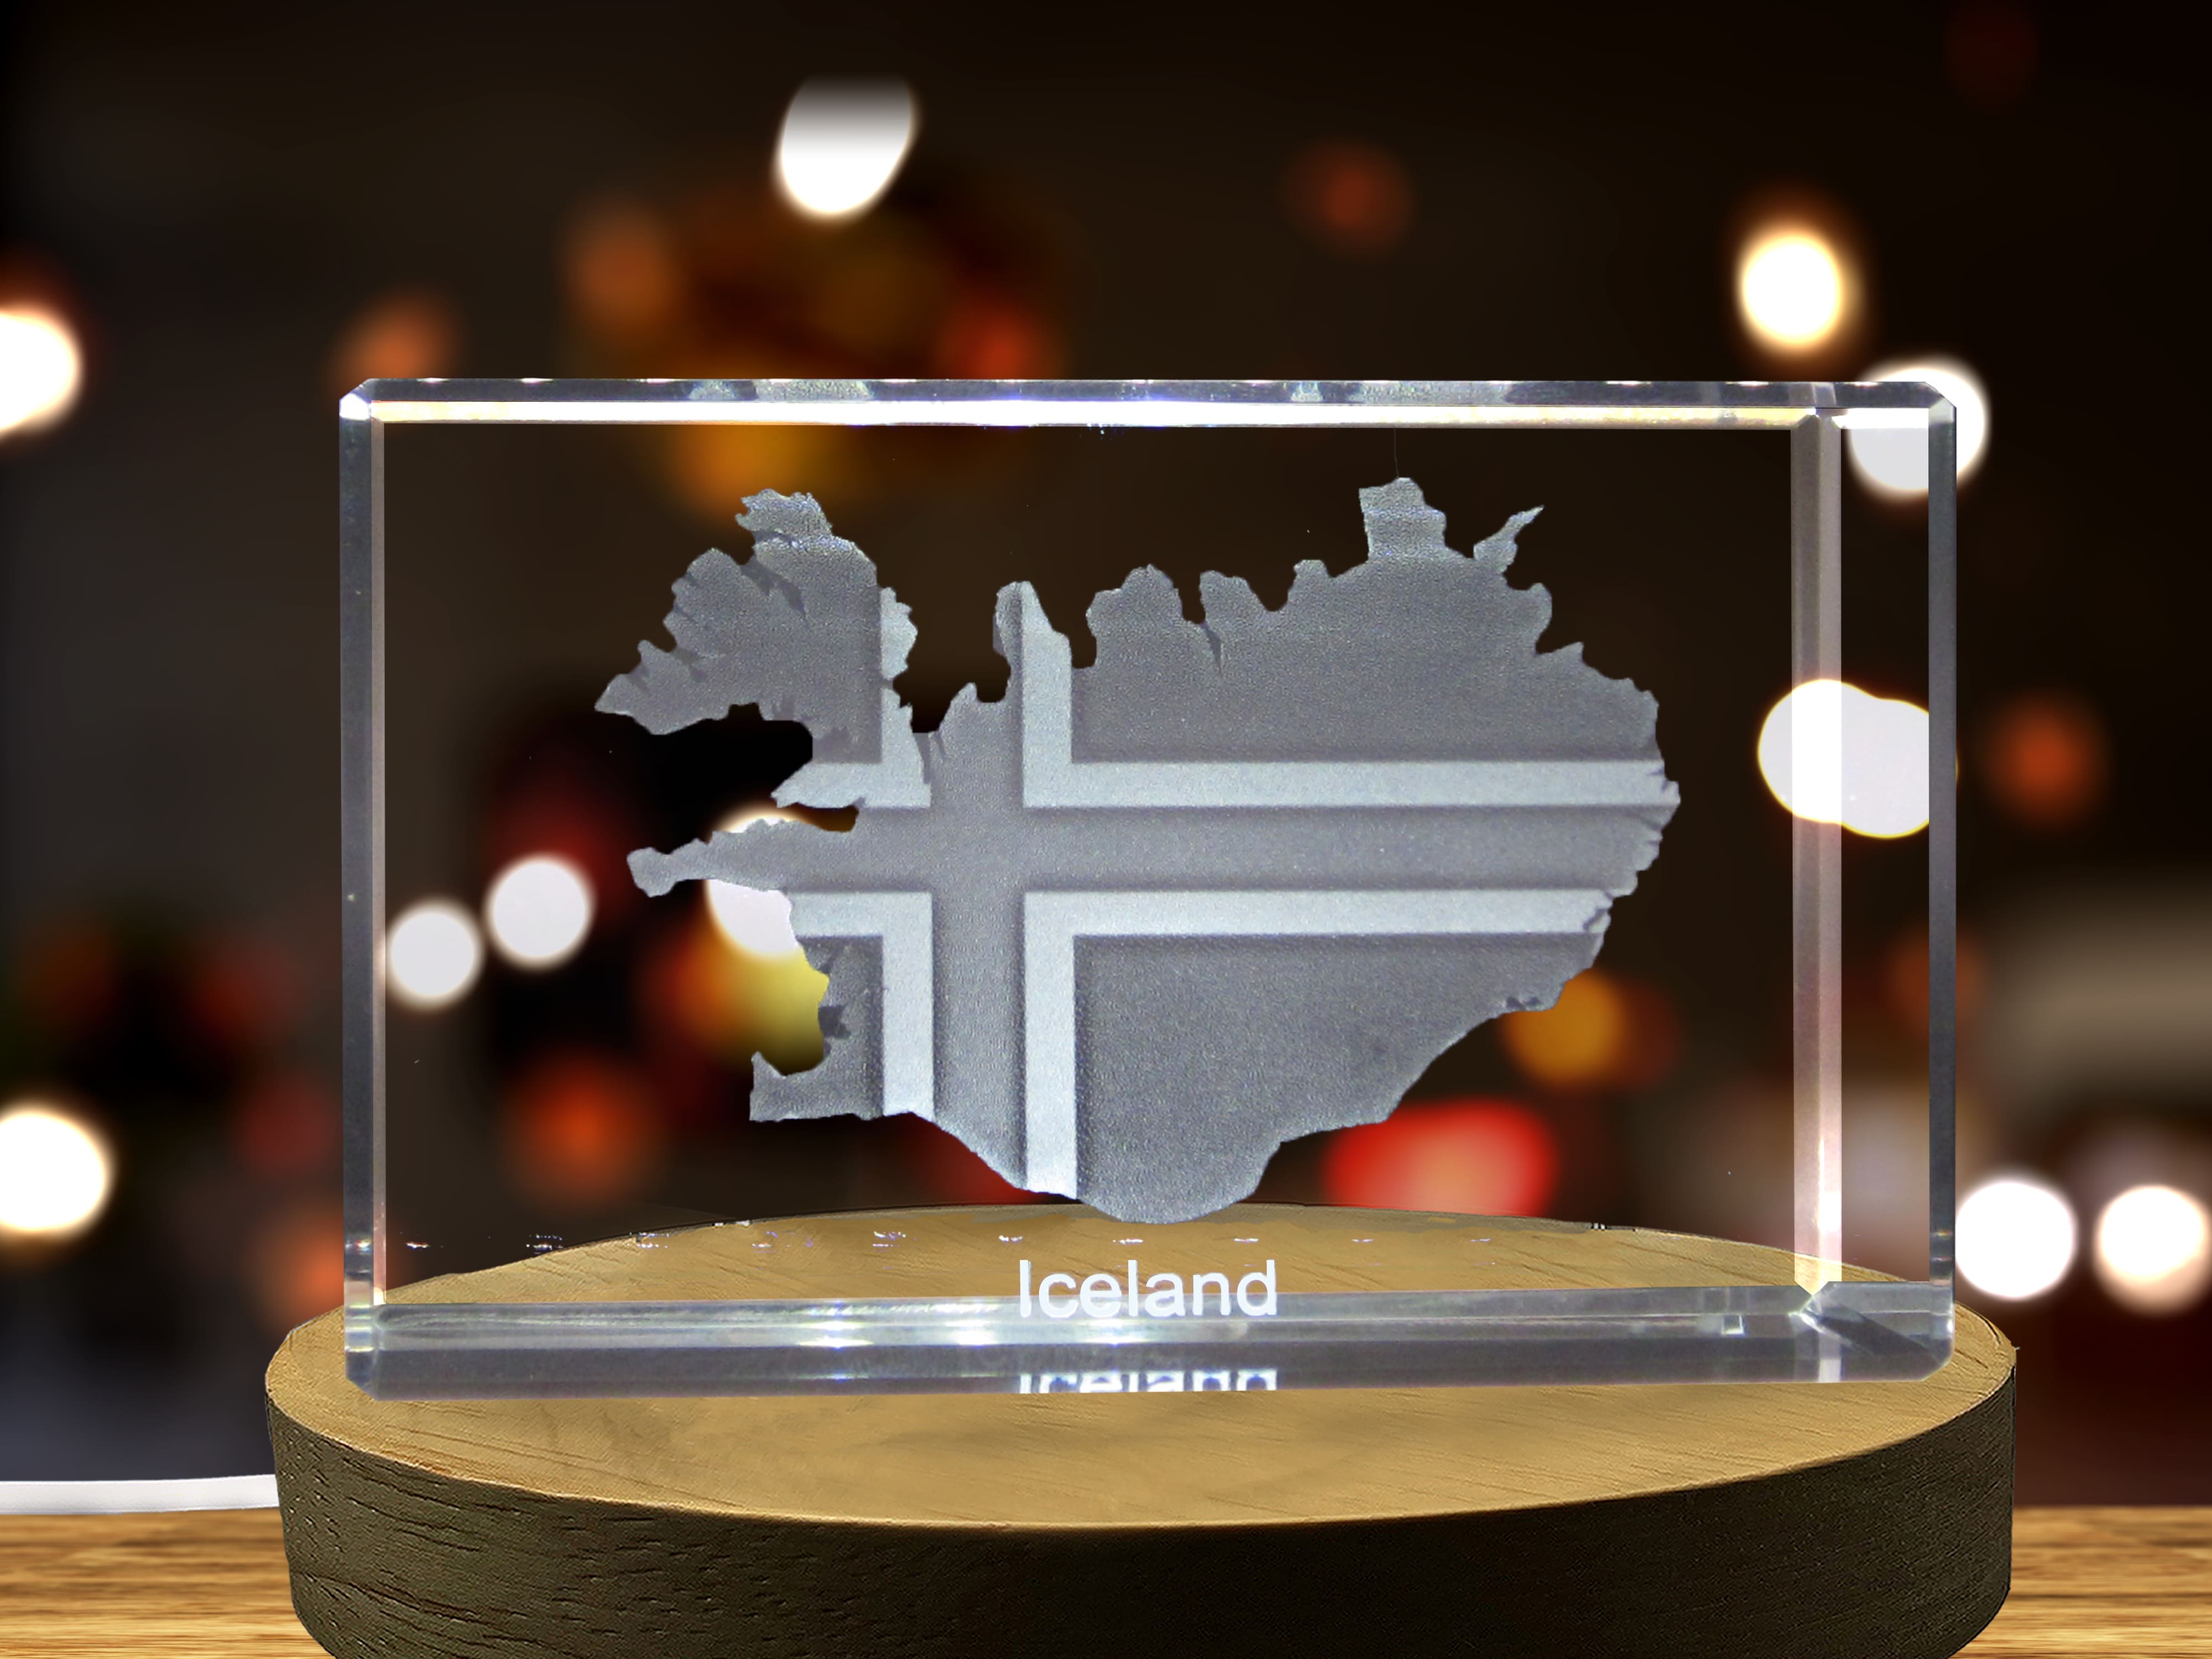 Iceland 3D Engraved Crystal 3D Engraved Crystal Keepsake/Gift/Decor/Collectible/Souvenir A&B Crystal Collection